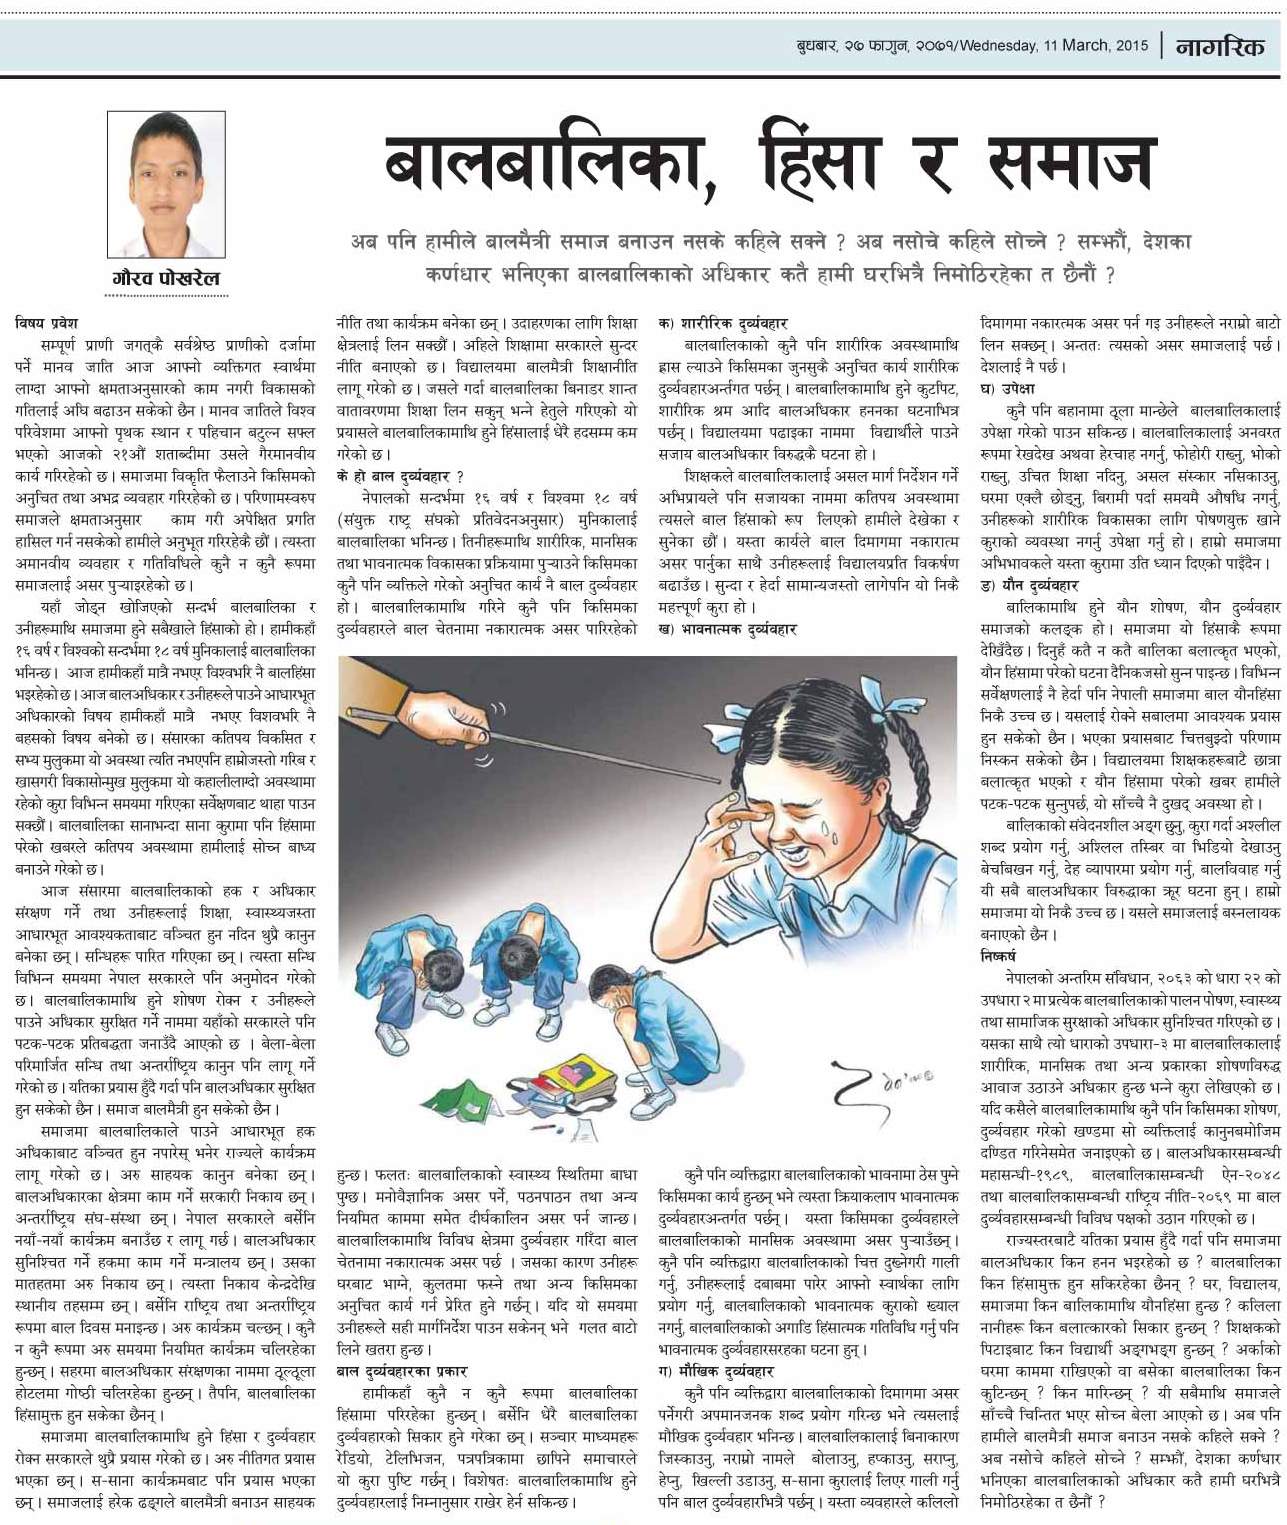 A snapshot of an article as was publised in Annapurna Post